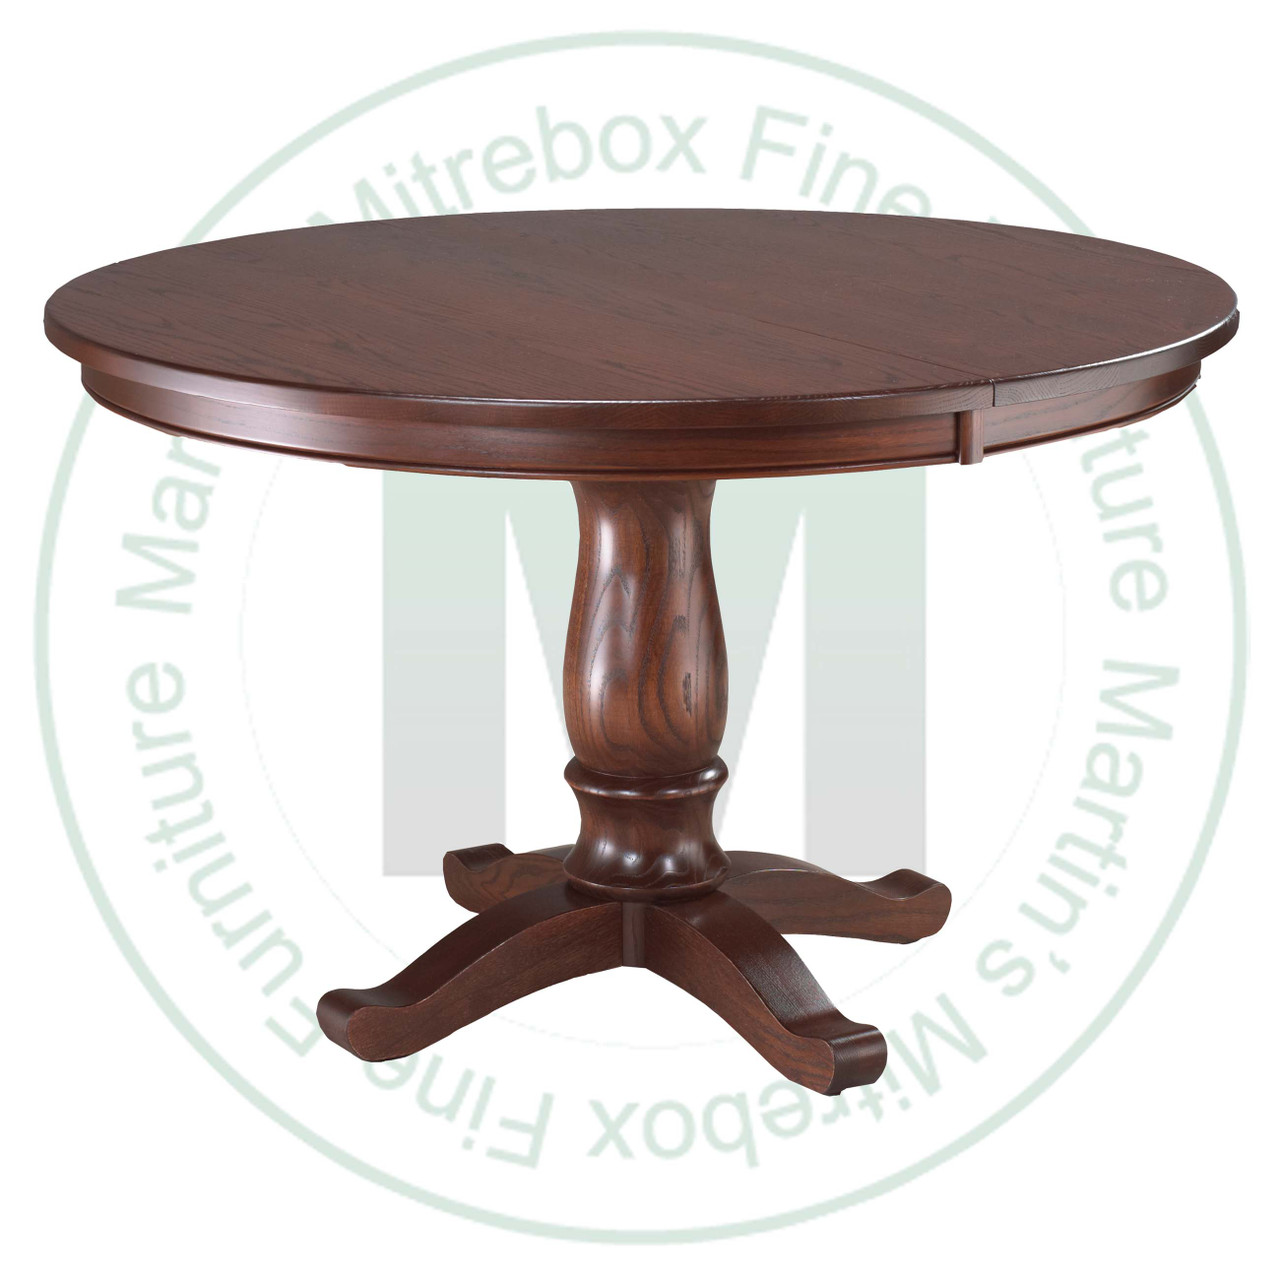 Maple Kimberly Crest Single Pedestal Table 36''D x 48''W x 30''H Round Solid Table